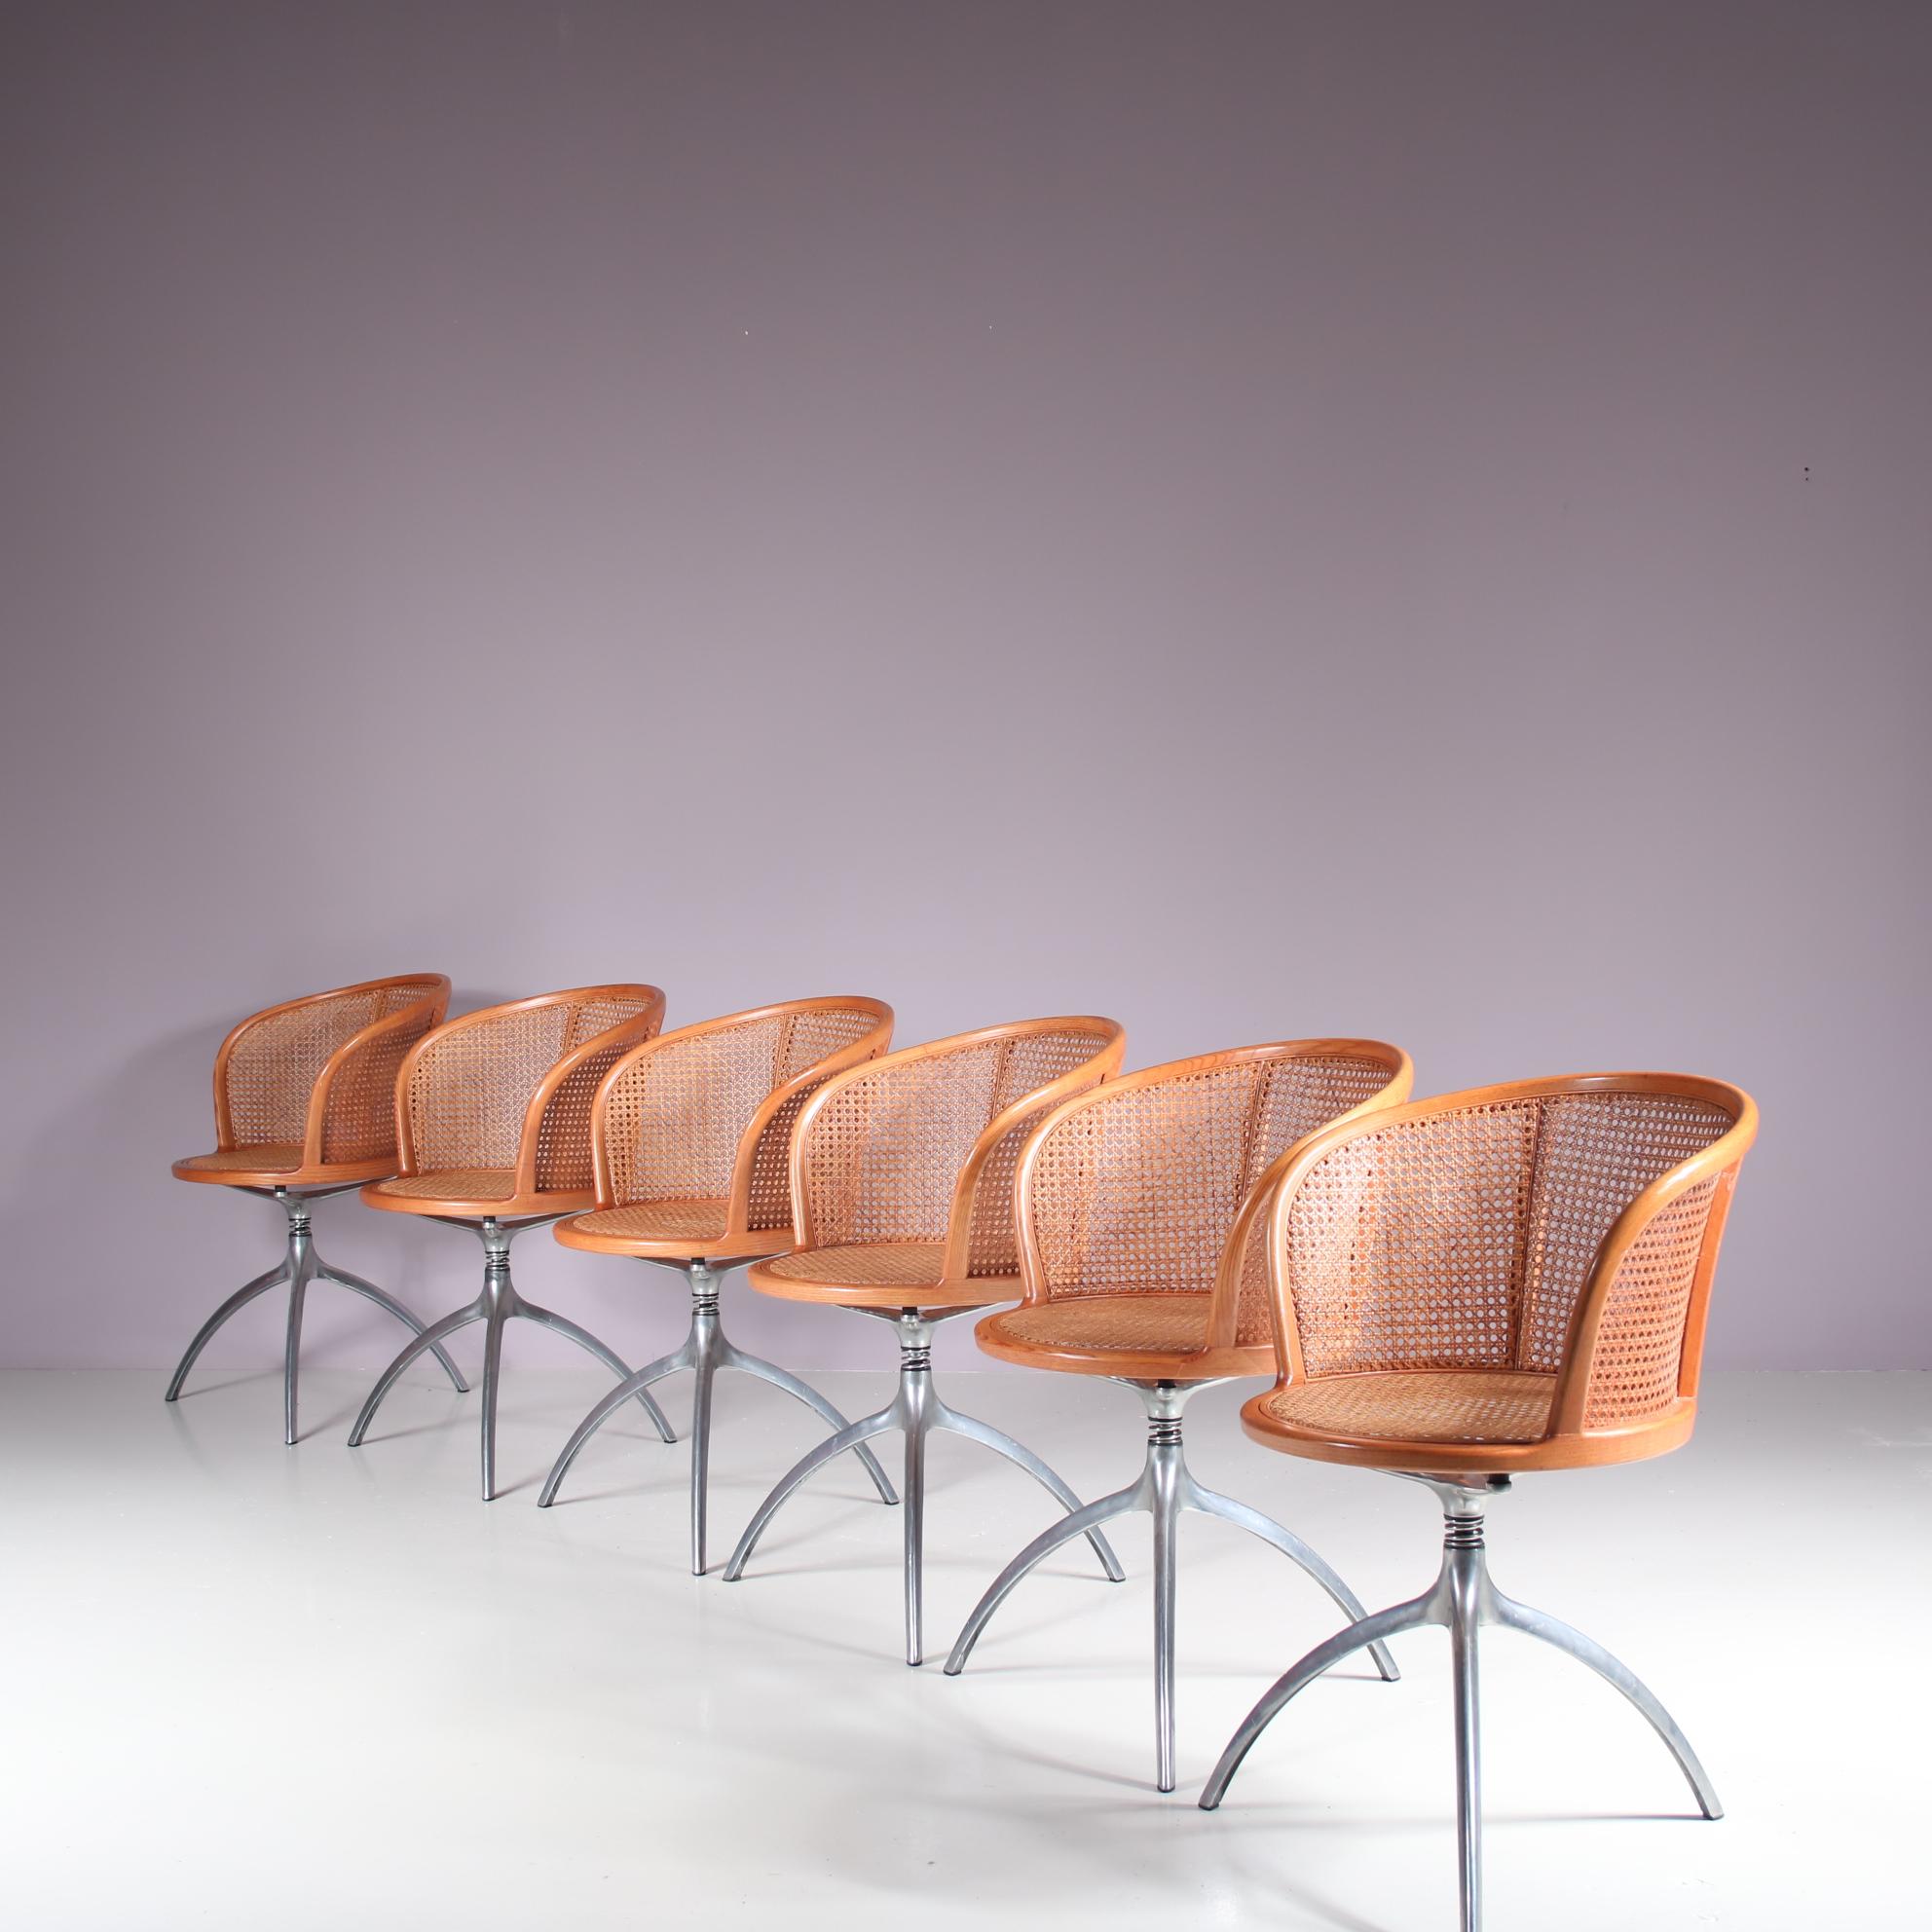 Set of 6 “Young Lady” Chairs by Paolo Rizzatto for Alias, Italy 1990 In Good Condition For Sale In Amsterdam, NL